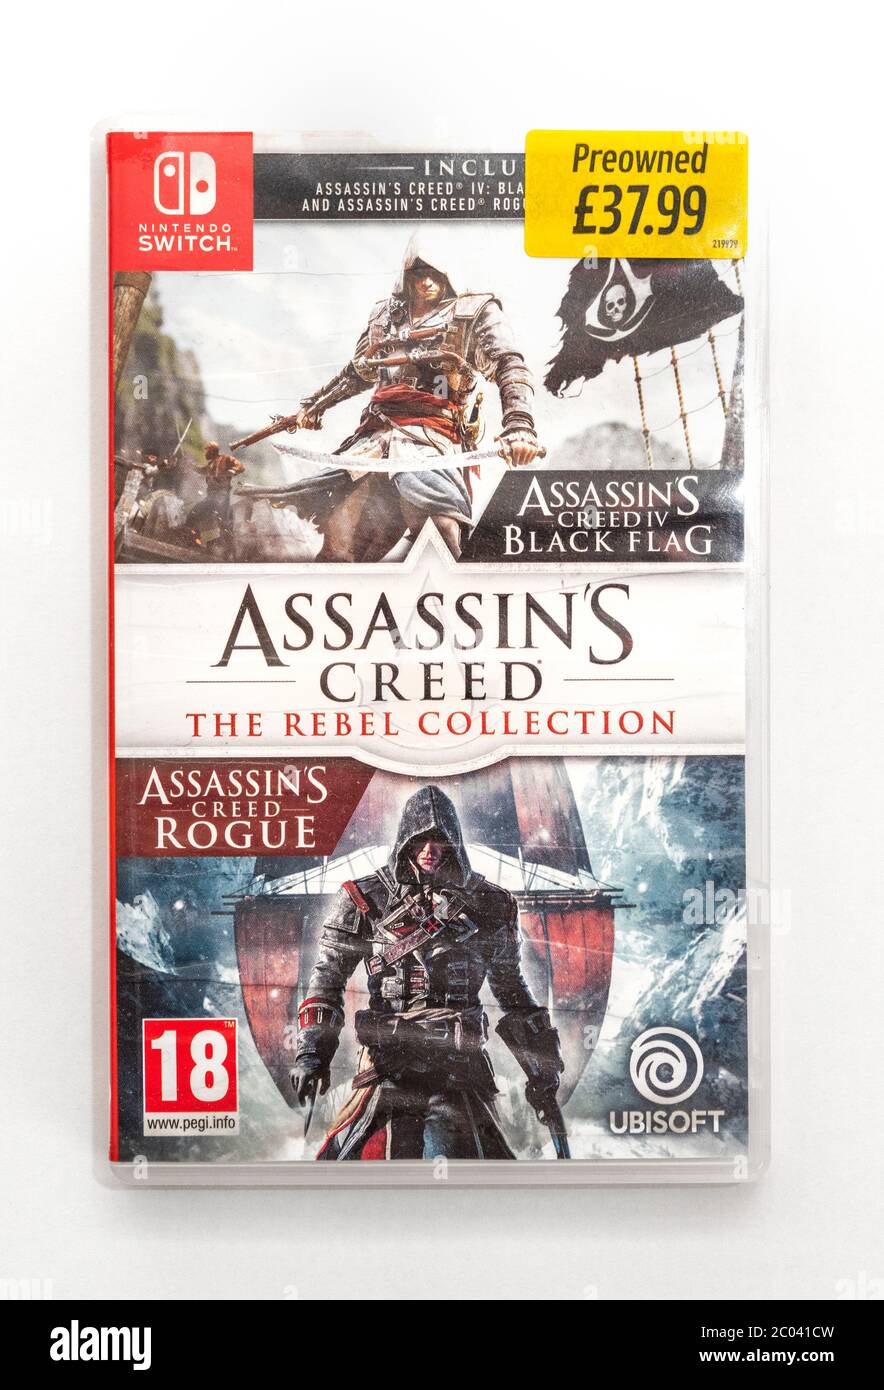 Nintendo switch,assassins creed,the rebel collection game,preowned on a white background Stock Photo